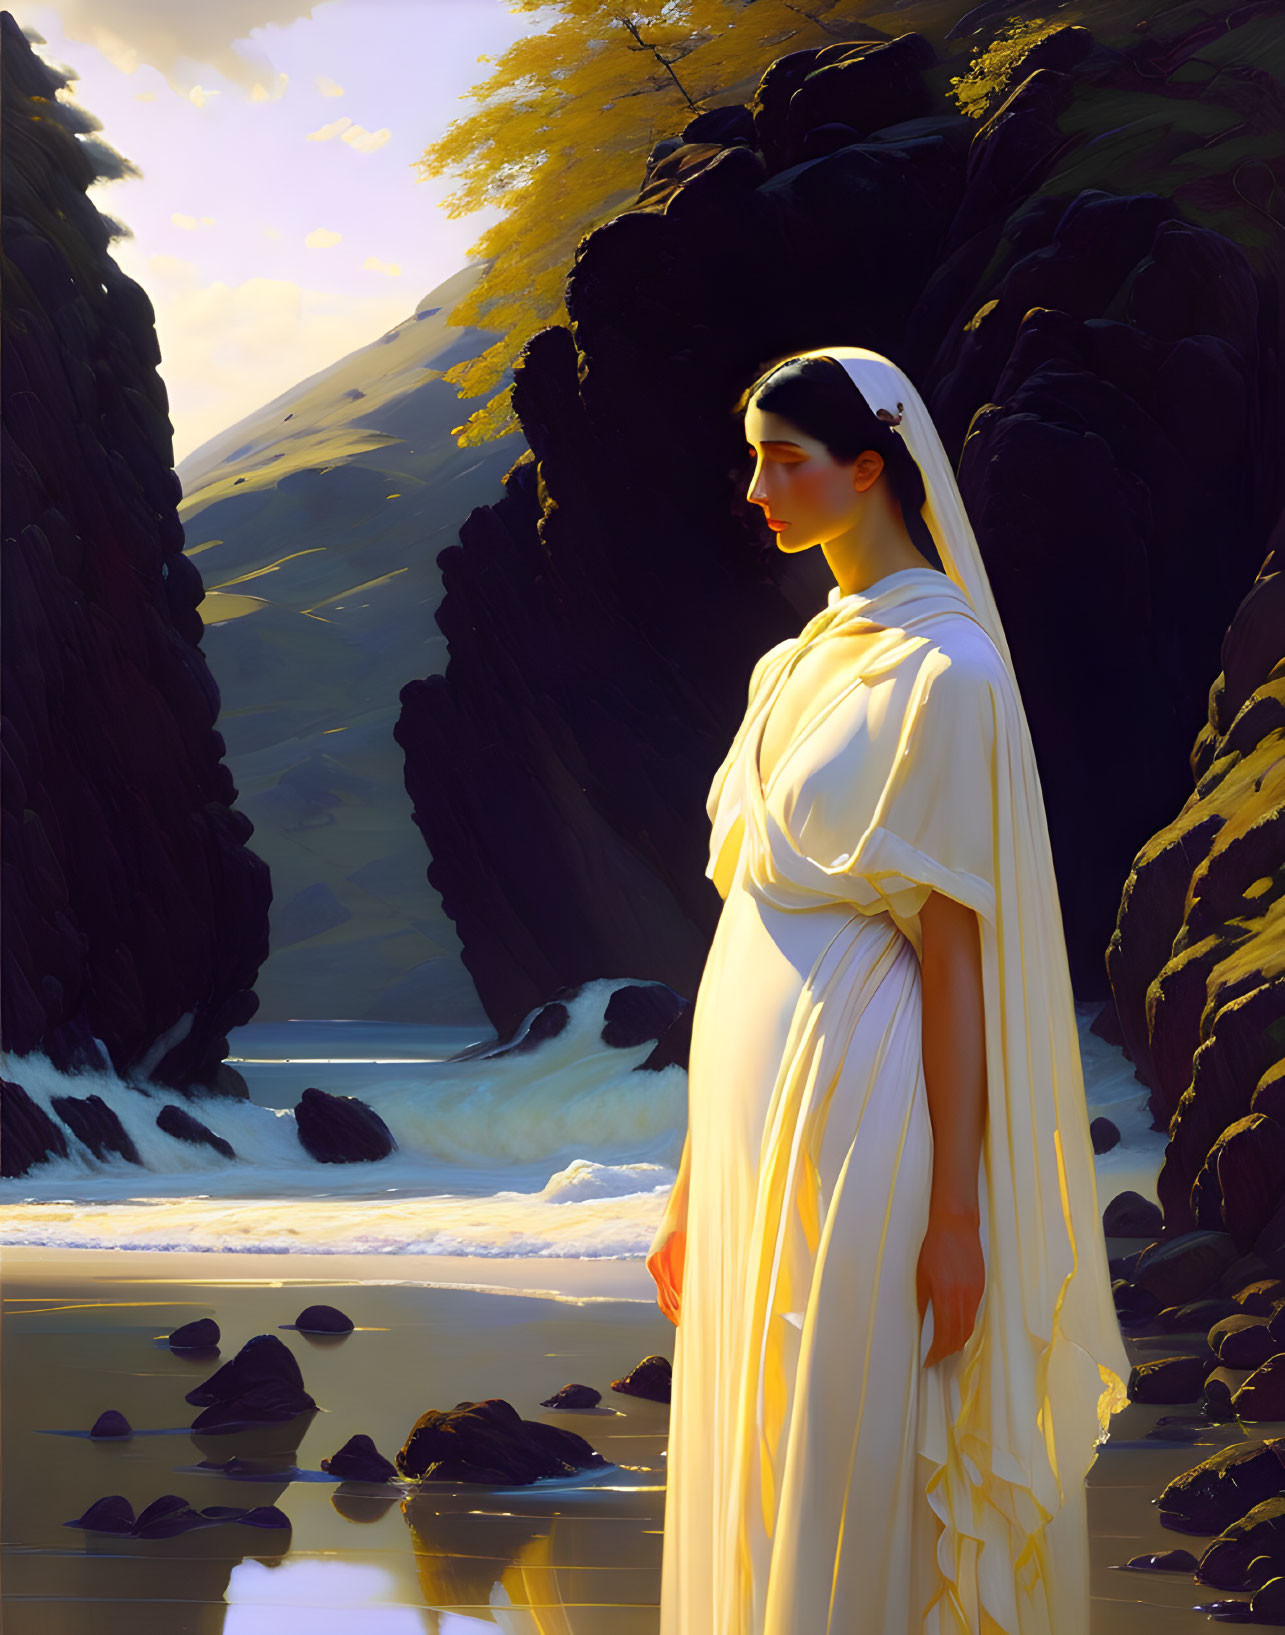 Woman in white robes by beach with cliffs and crashing waves